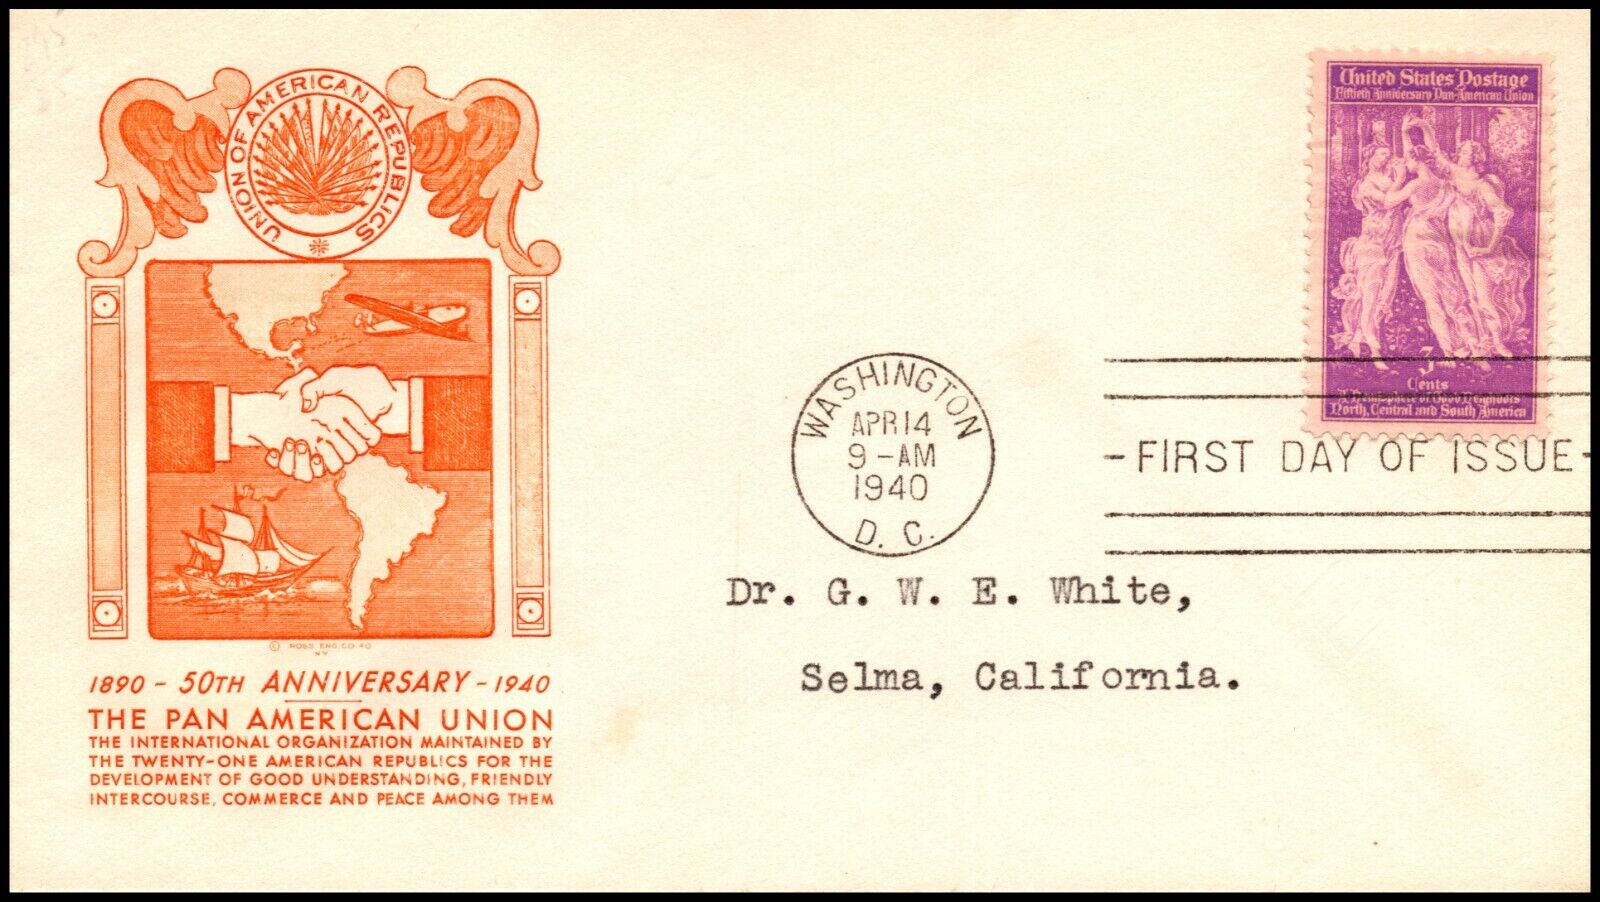 Scott 895 3 Cents Pan American Union Ross Engraving FDC Typed Ad